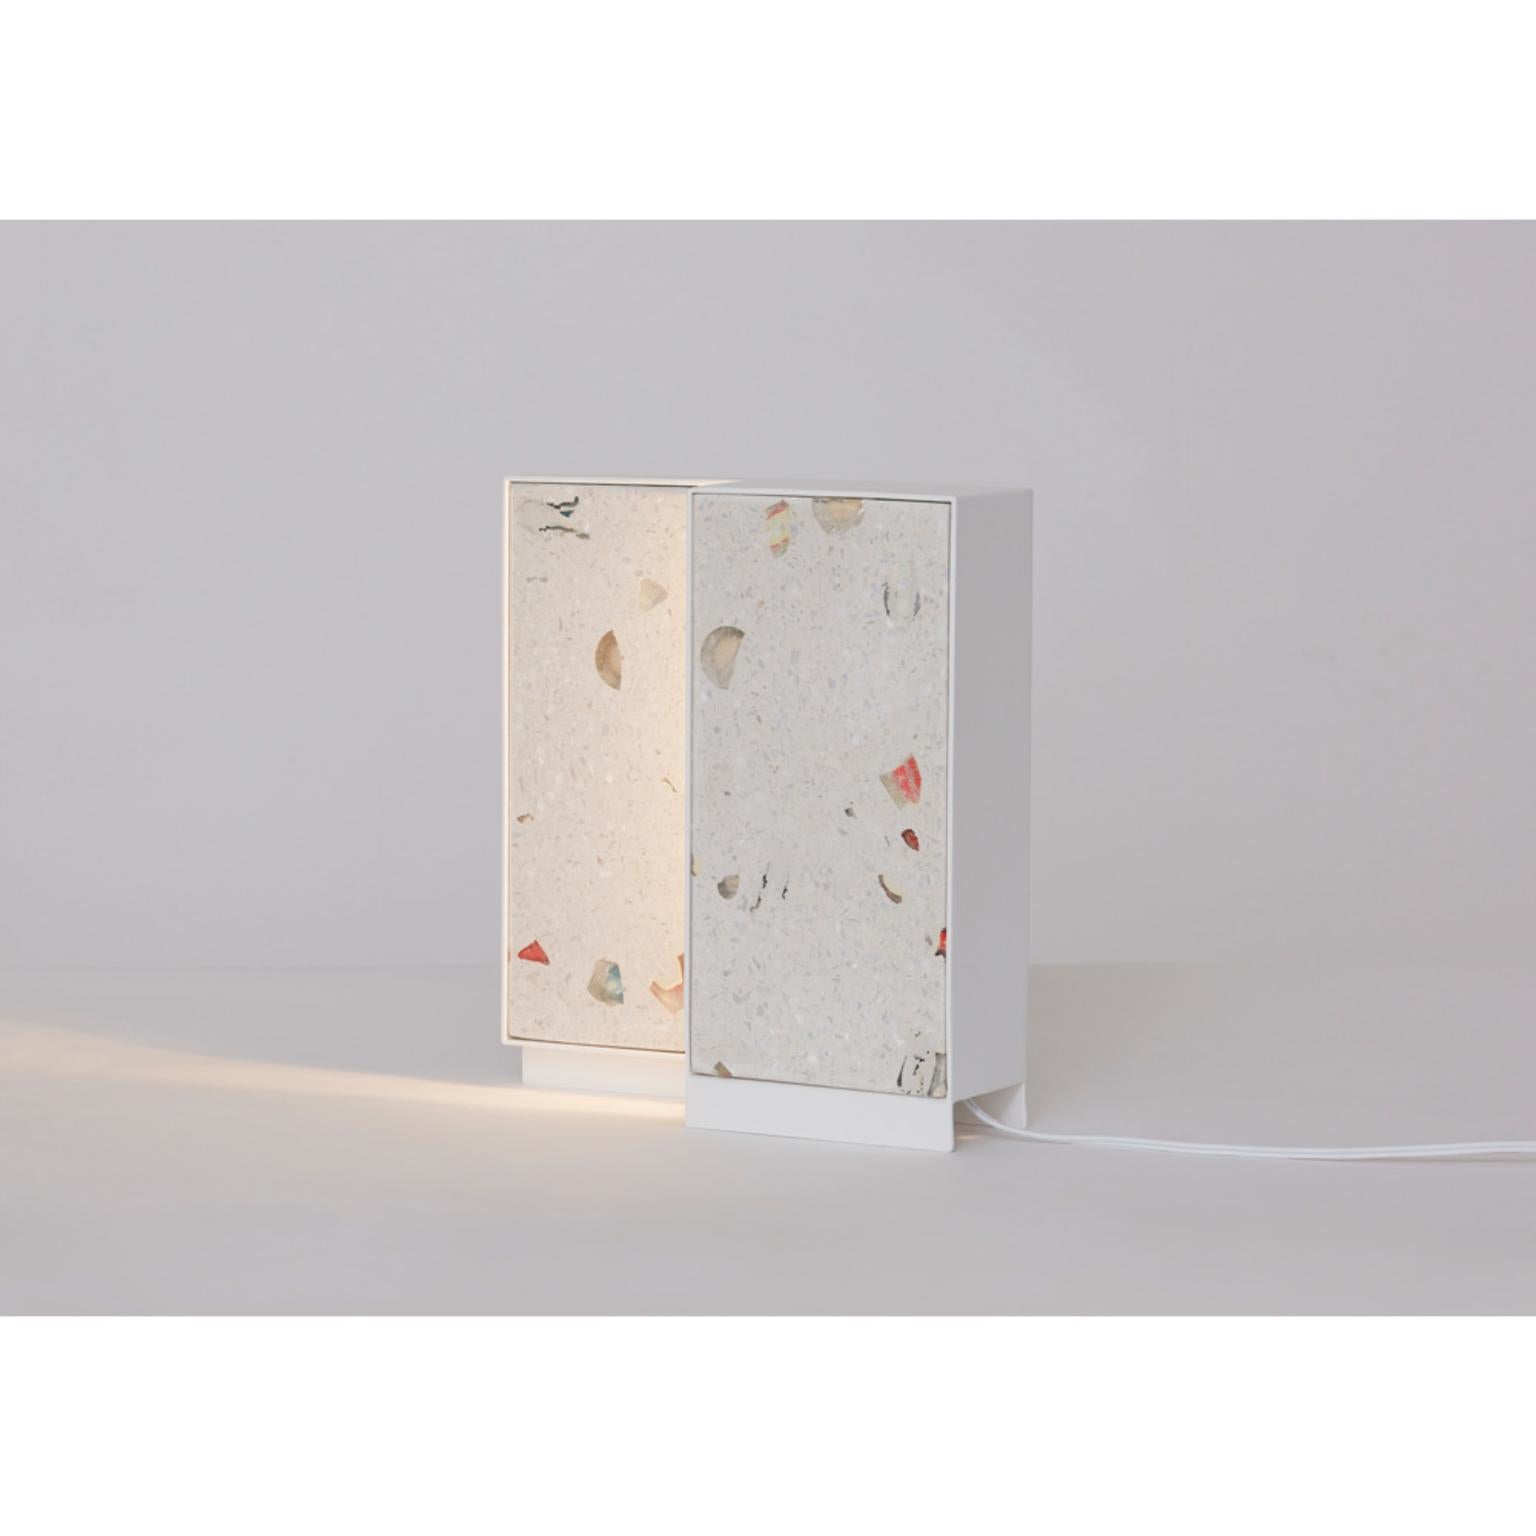 25/25 Table lamp by Llot Llov
Dimensions: W 25.5 x D 70 x H 27.3 cm
Materials: nail polish terrazzo.


The squared light 25/25 showcases the GLACIER. The material is framed in powder-coated steel. The light shines on the surface and brings out the